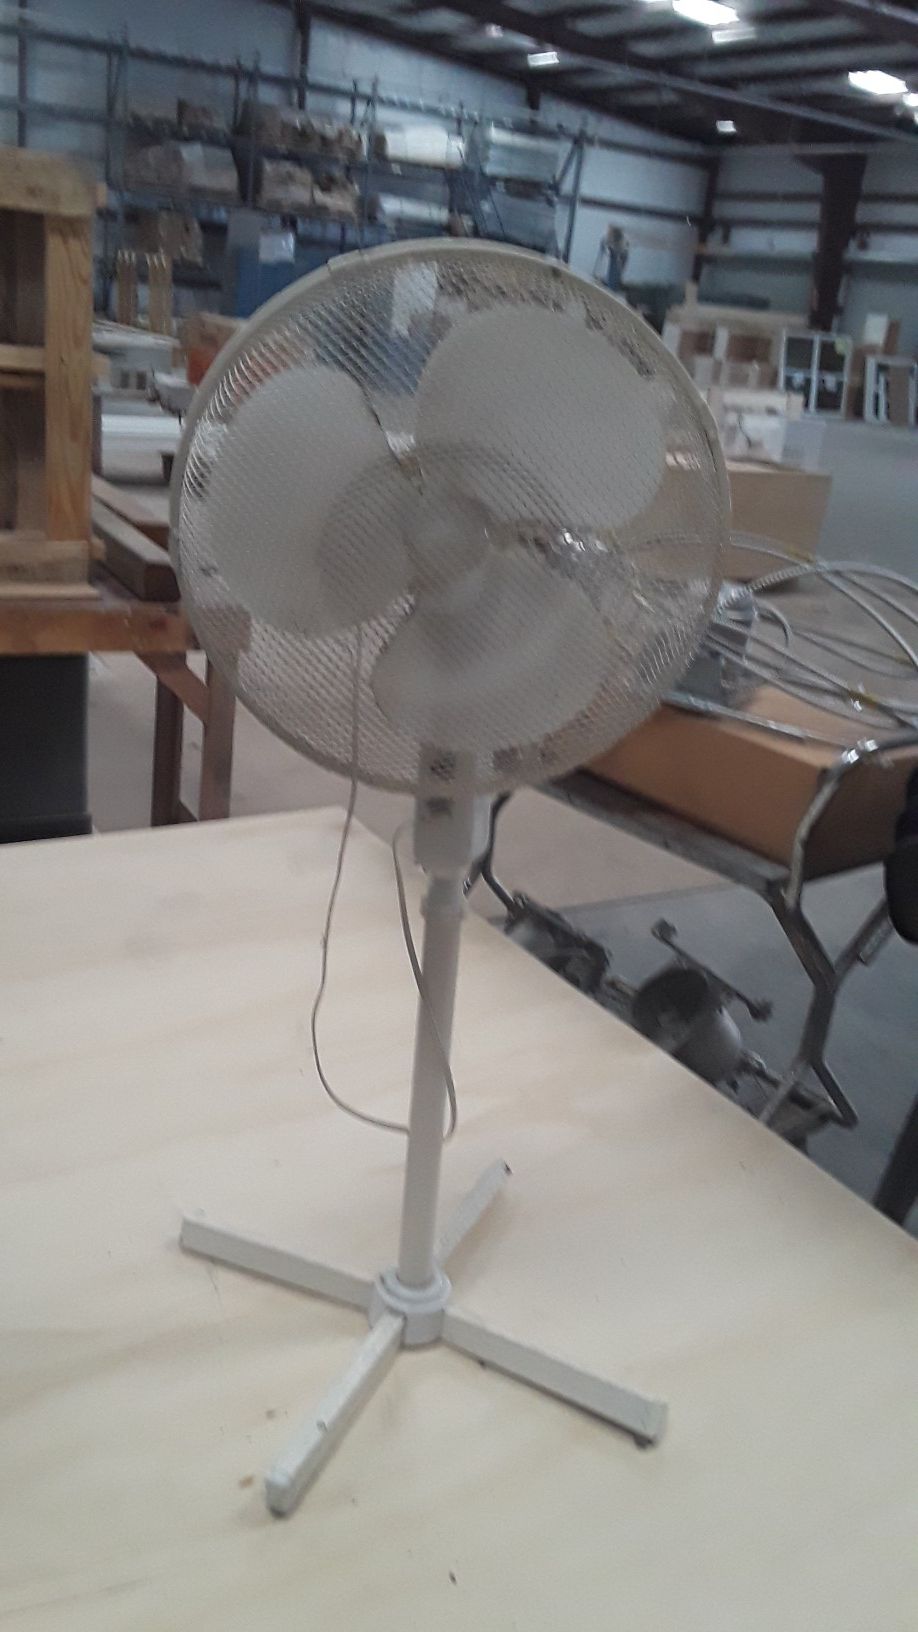 Oscillating three speed fan with stand